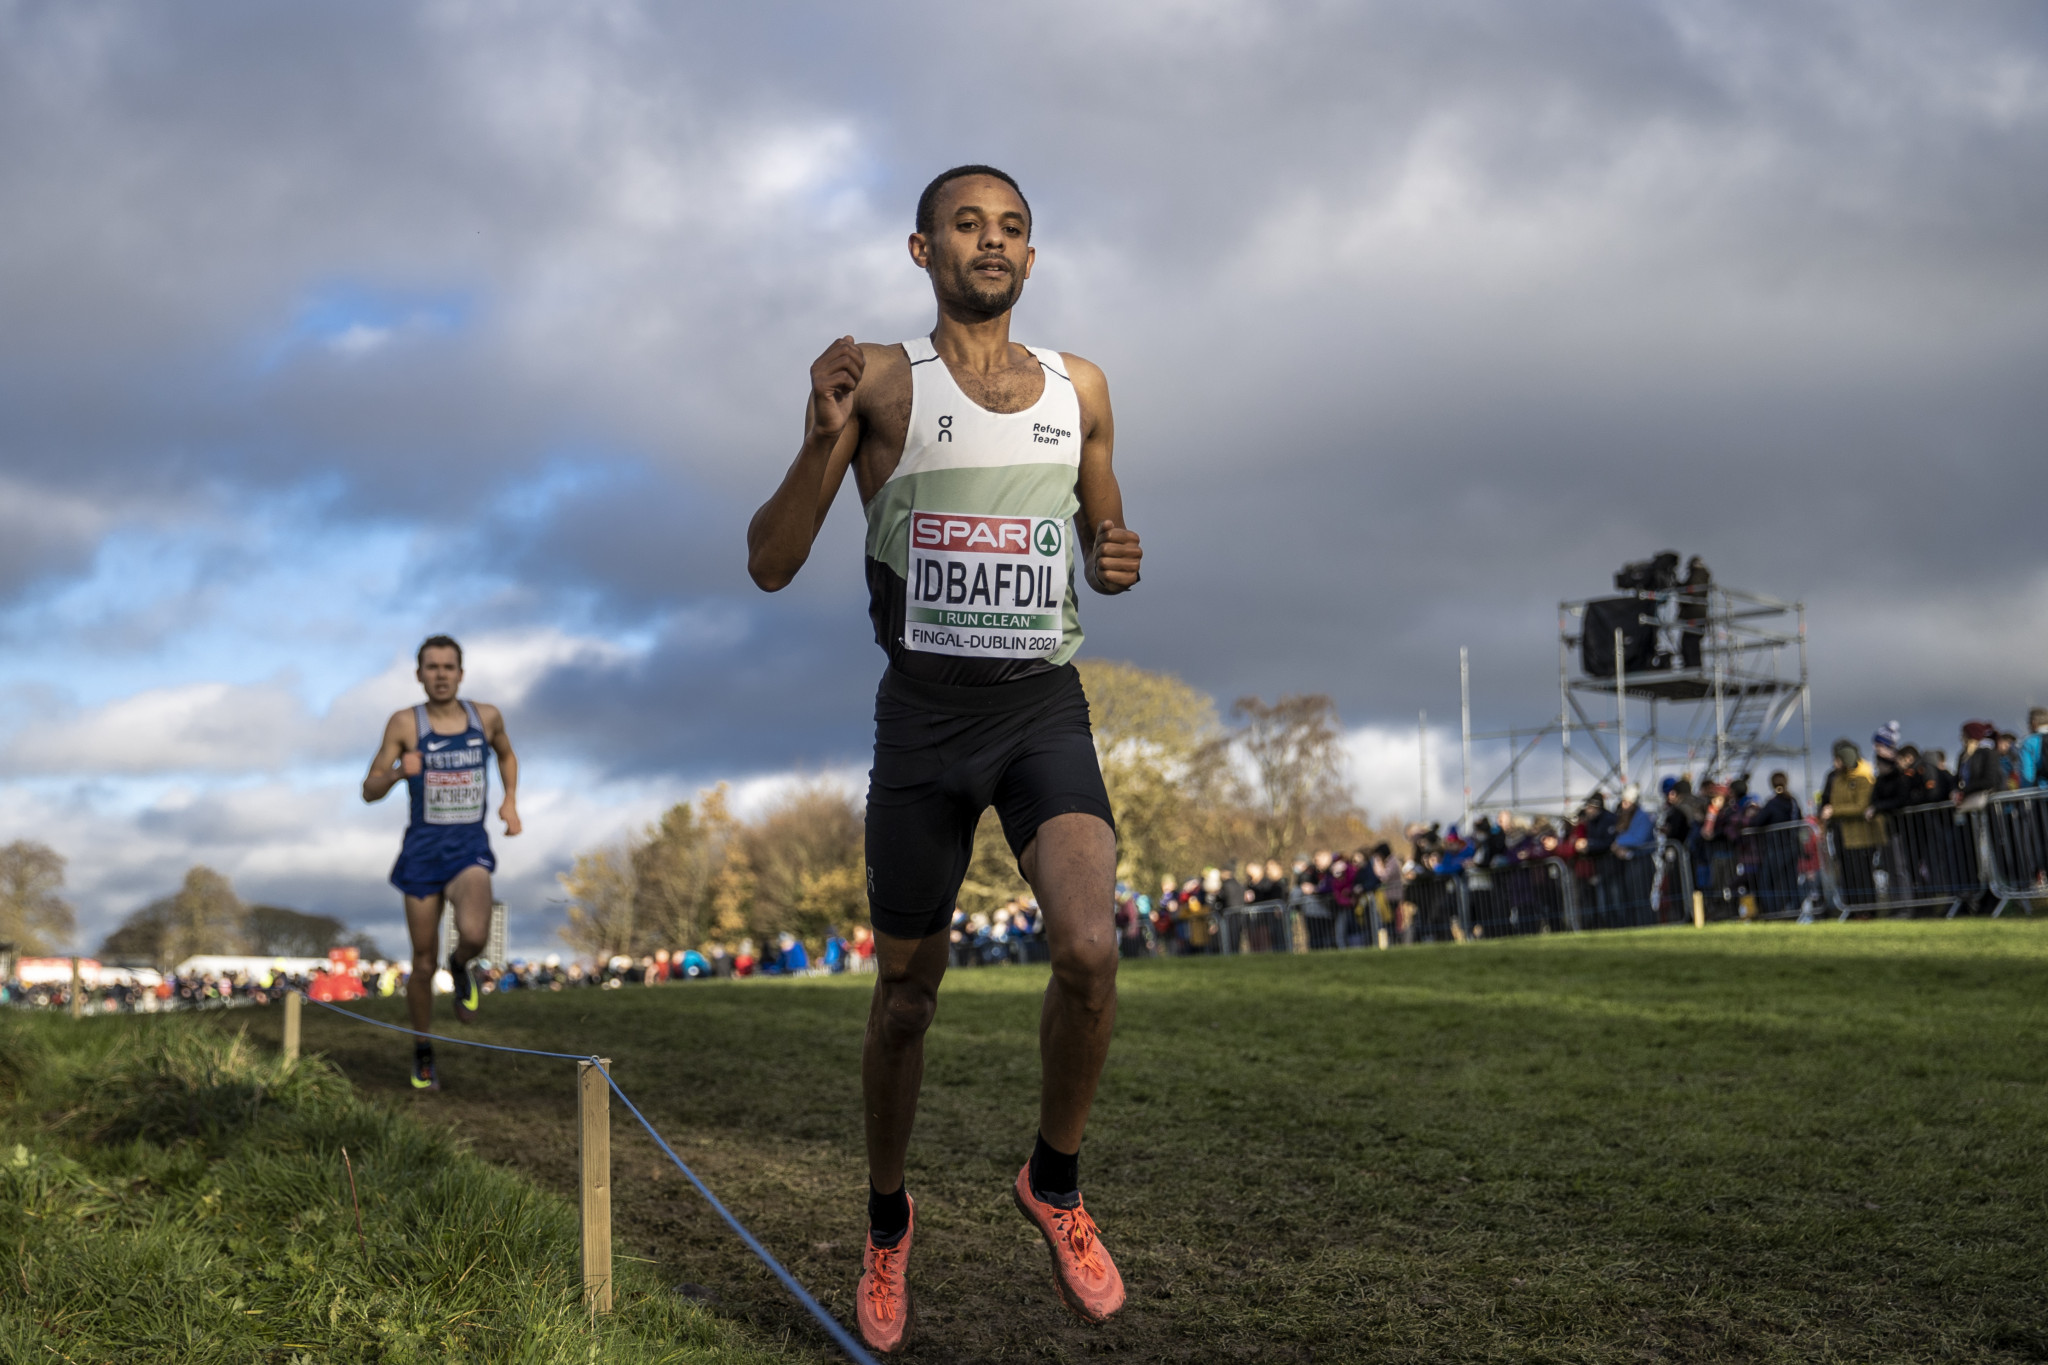 Fouad Idbafdil in action at the 2021 European Cross Country Championships ©Getty Images